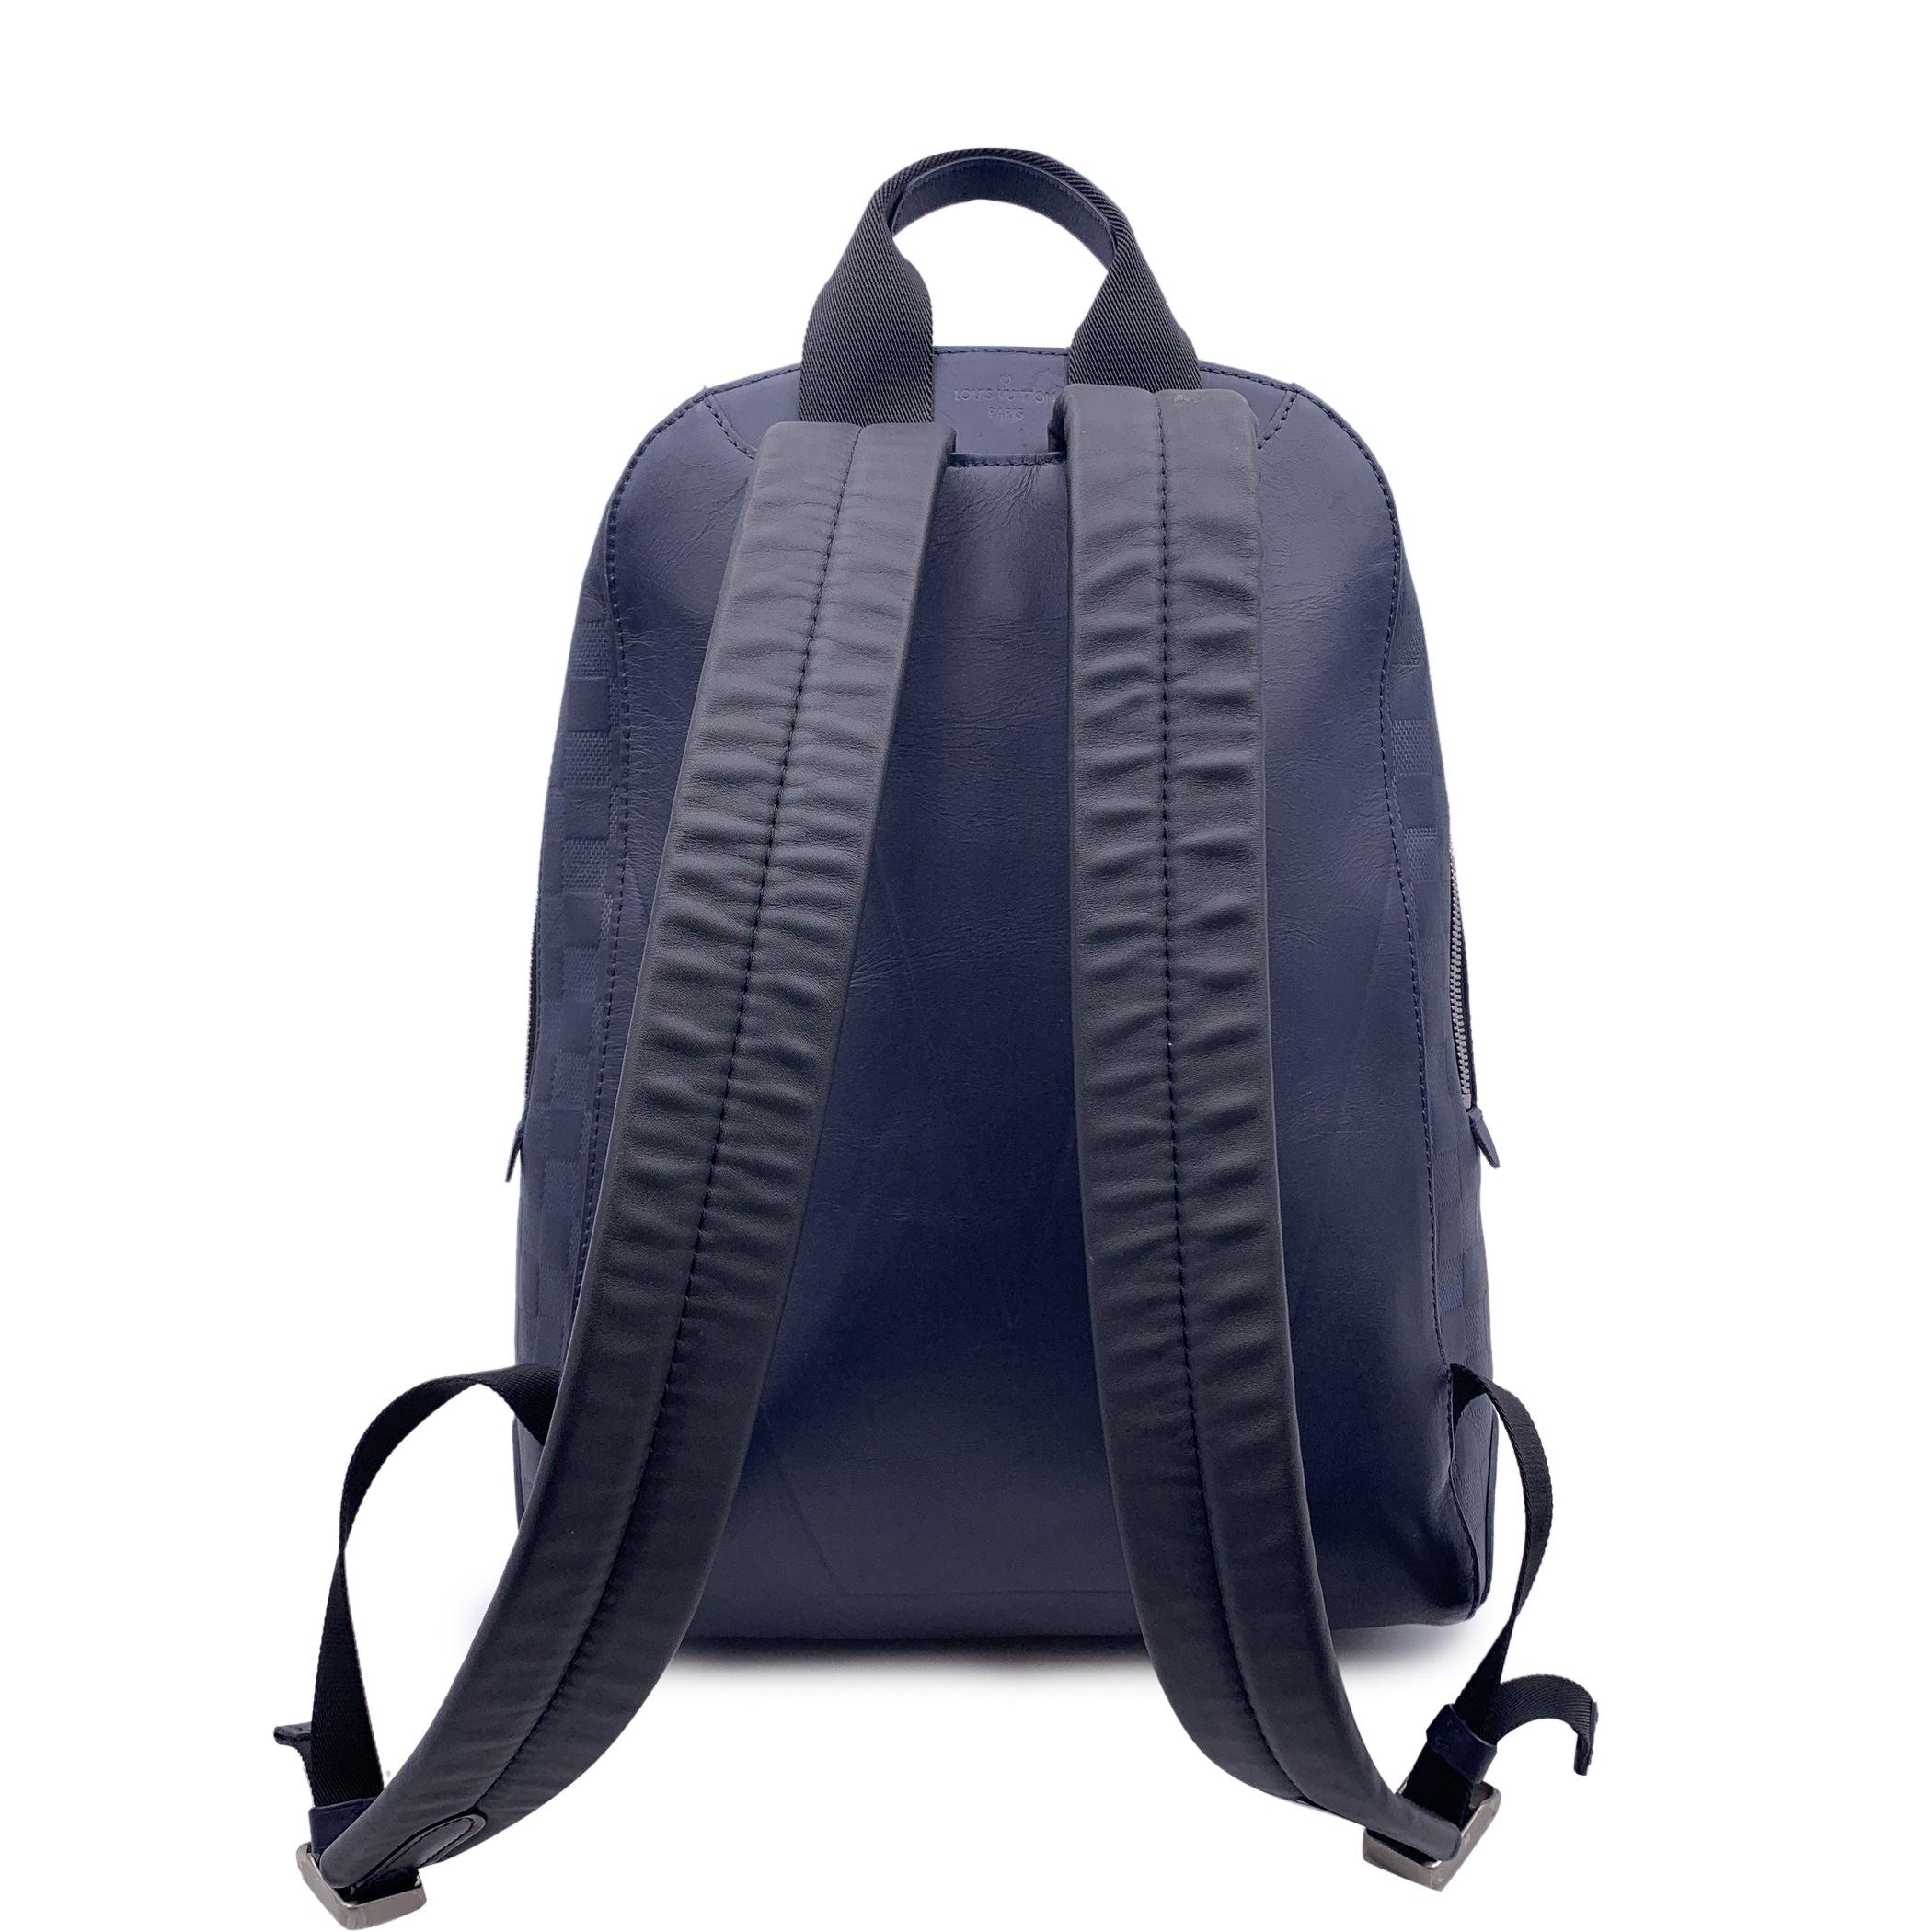 Women's or Men's Louis Vuitton Blue Astral Damier Infini Leather Campus Backpack Bag